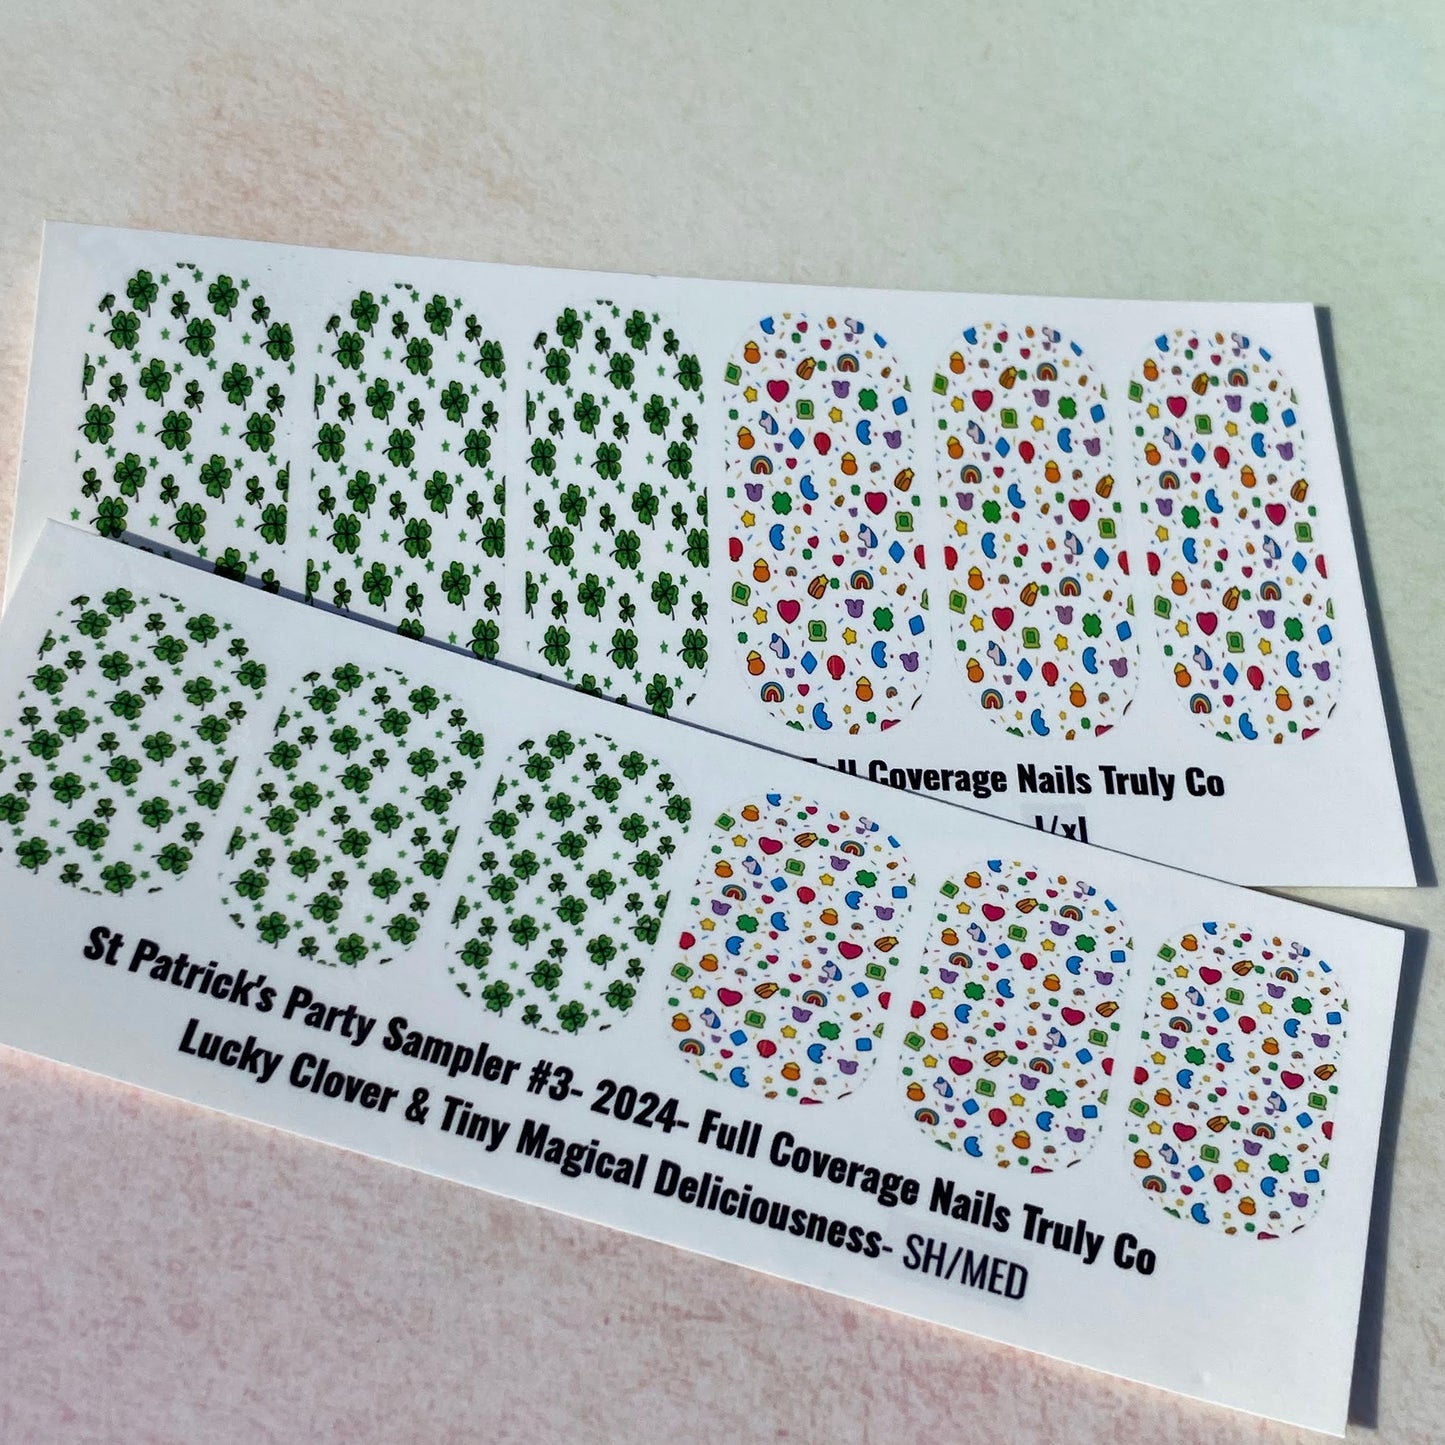 St. Patrick's Day Nail Wrap Decals-St Patrick's Party Sampler #3